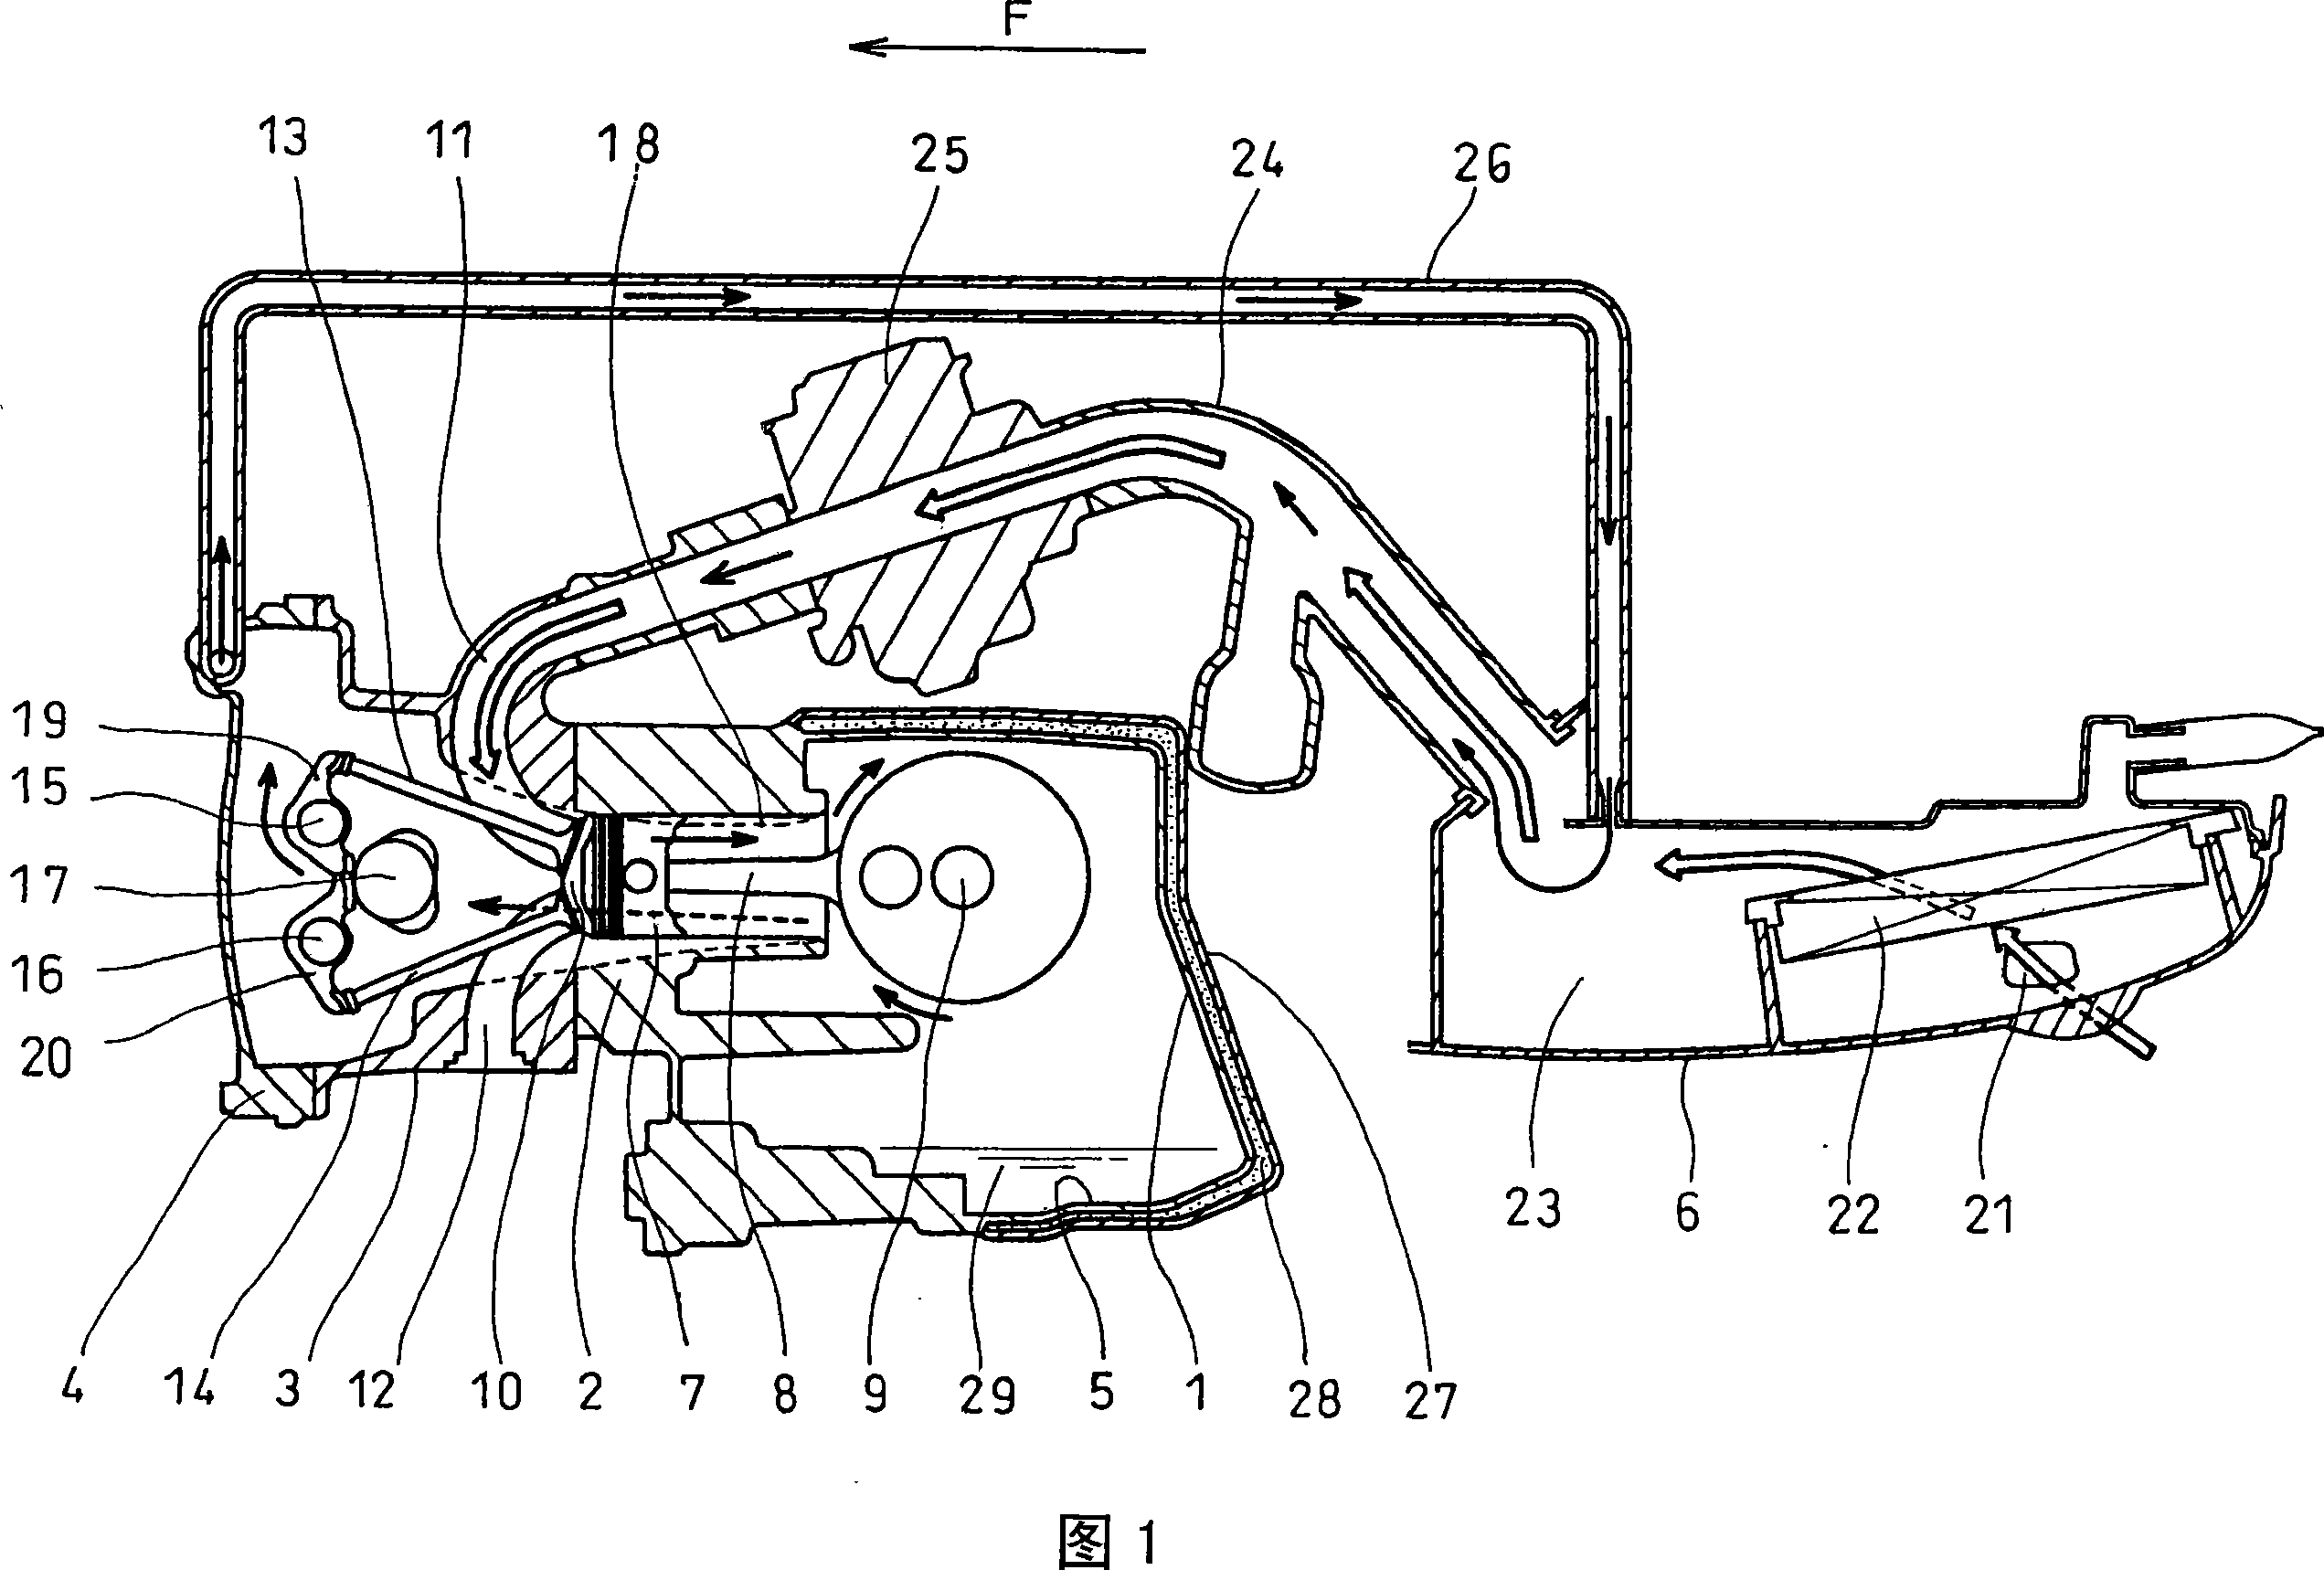 Crankcase of internal combustion engine